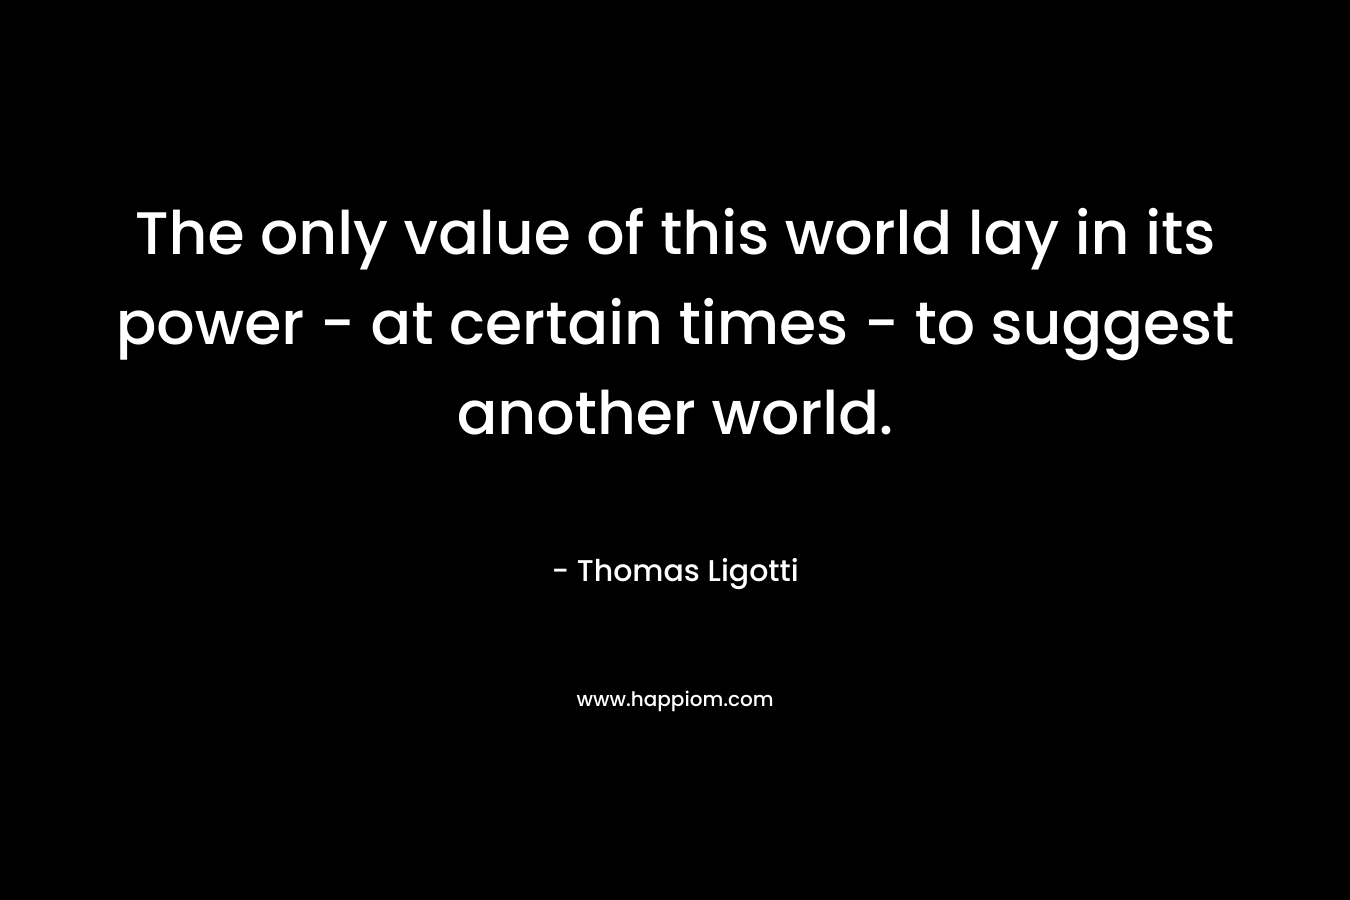 The only value of this world lay in its power - at certain times - to suggest another world.